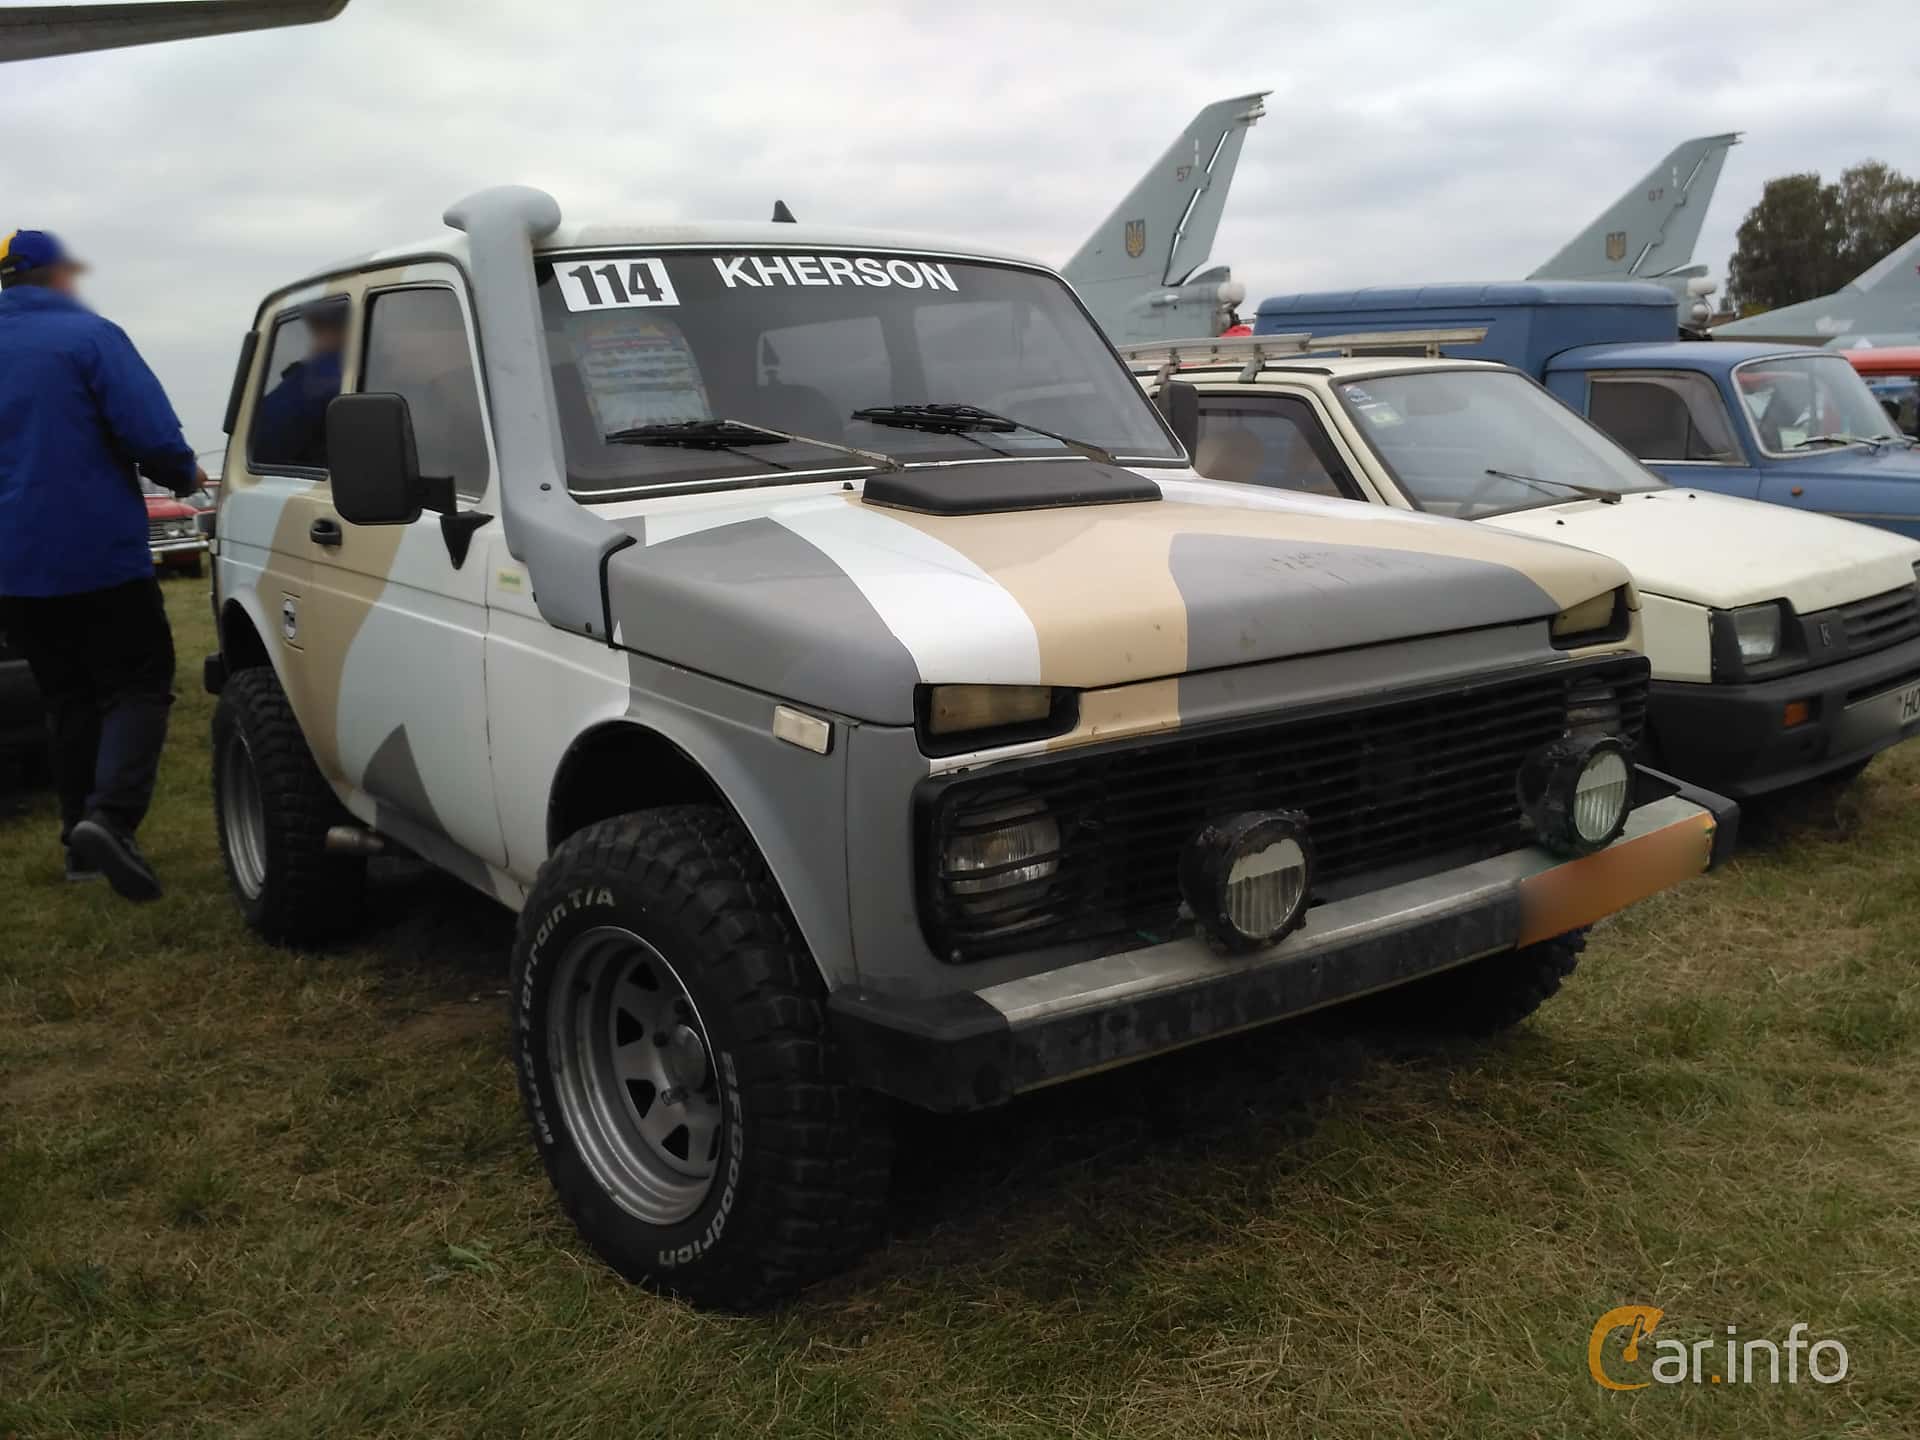 4 Images Of Lada Niva 3 Door 1981 By Pavelyakovenko Images, Photos, Reviews